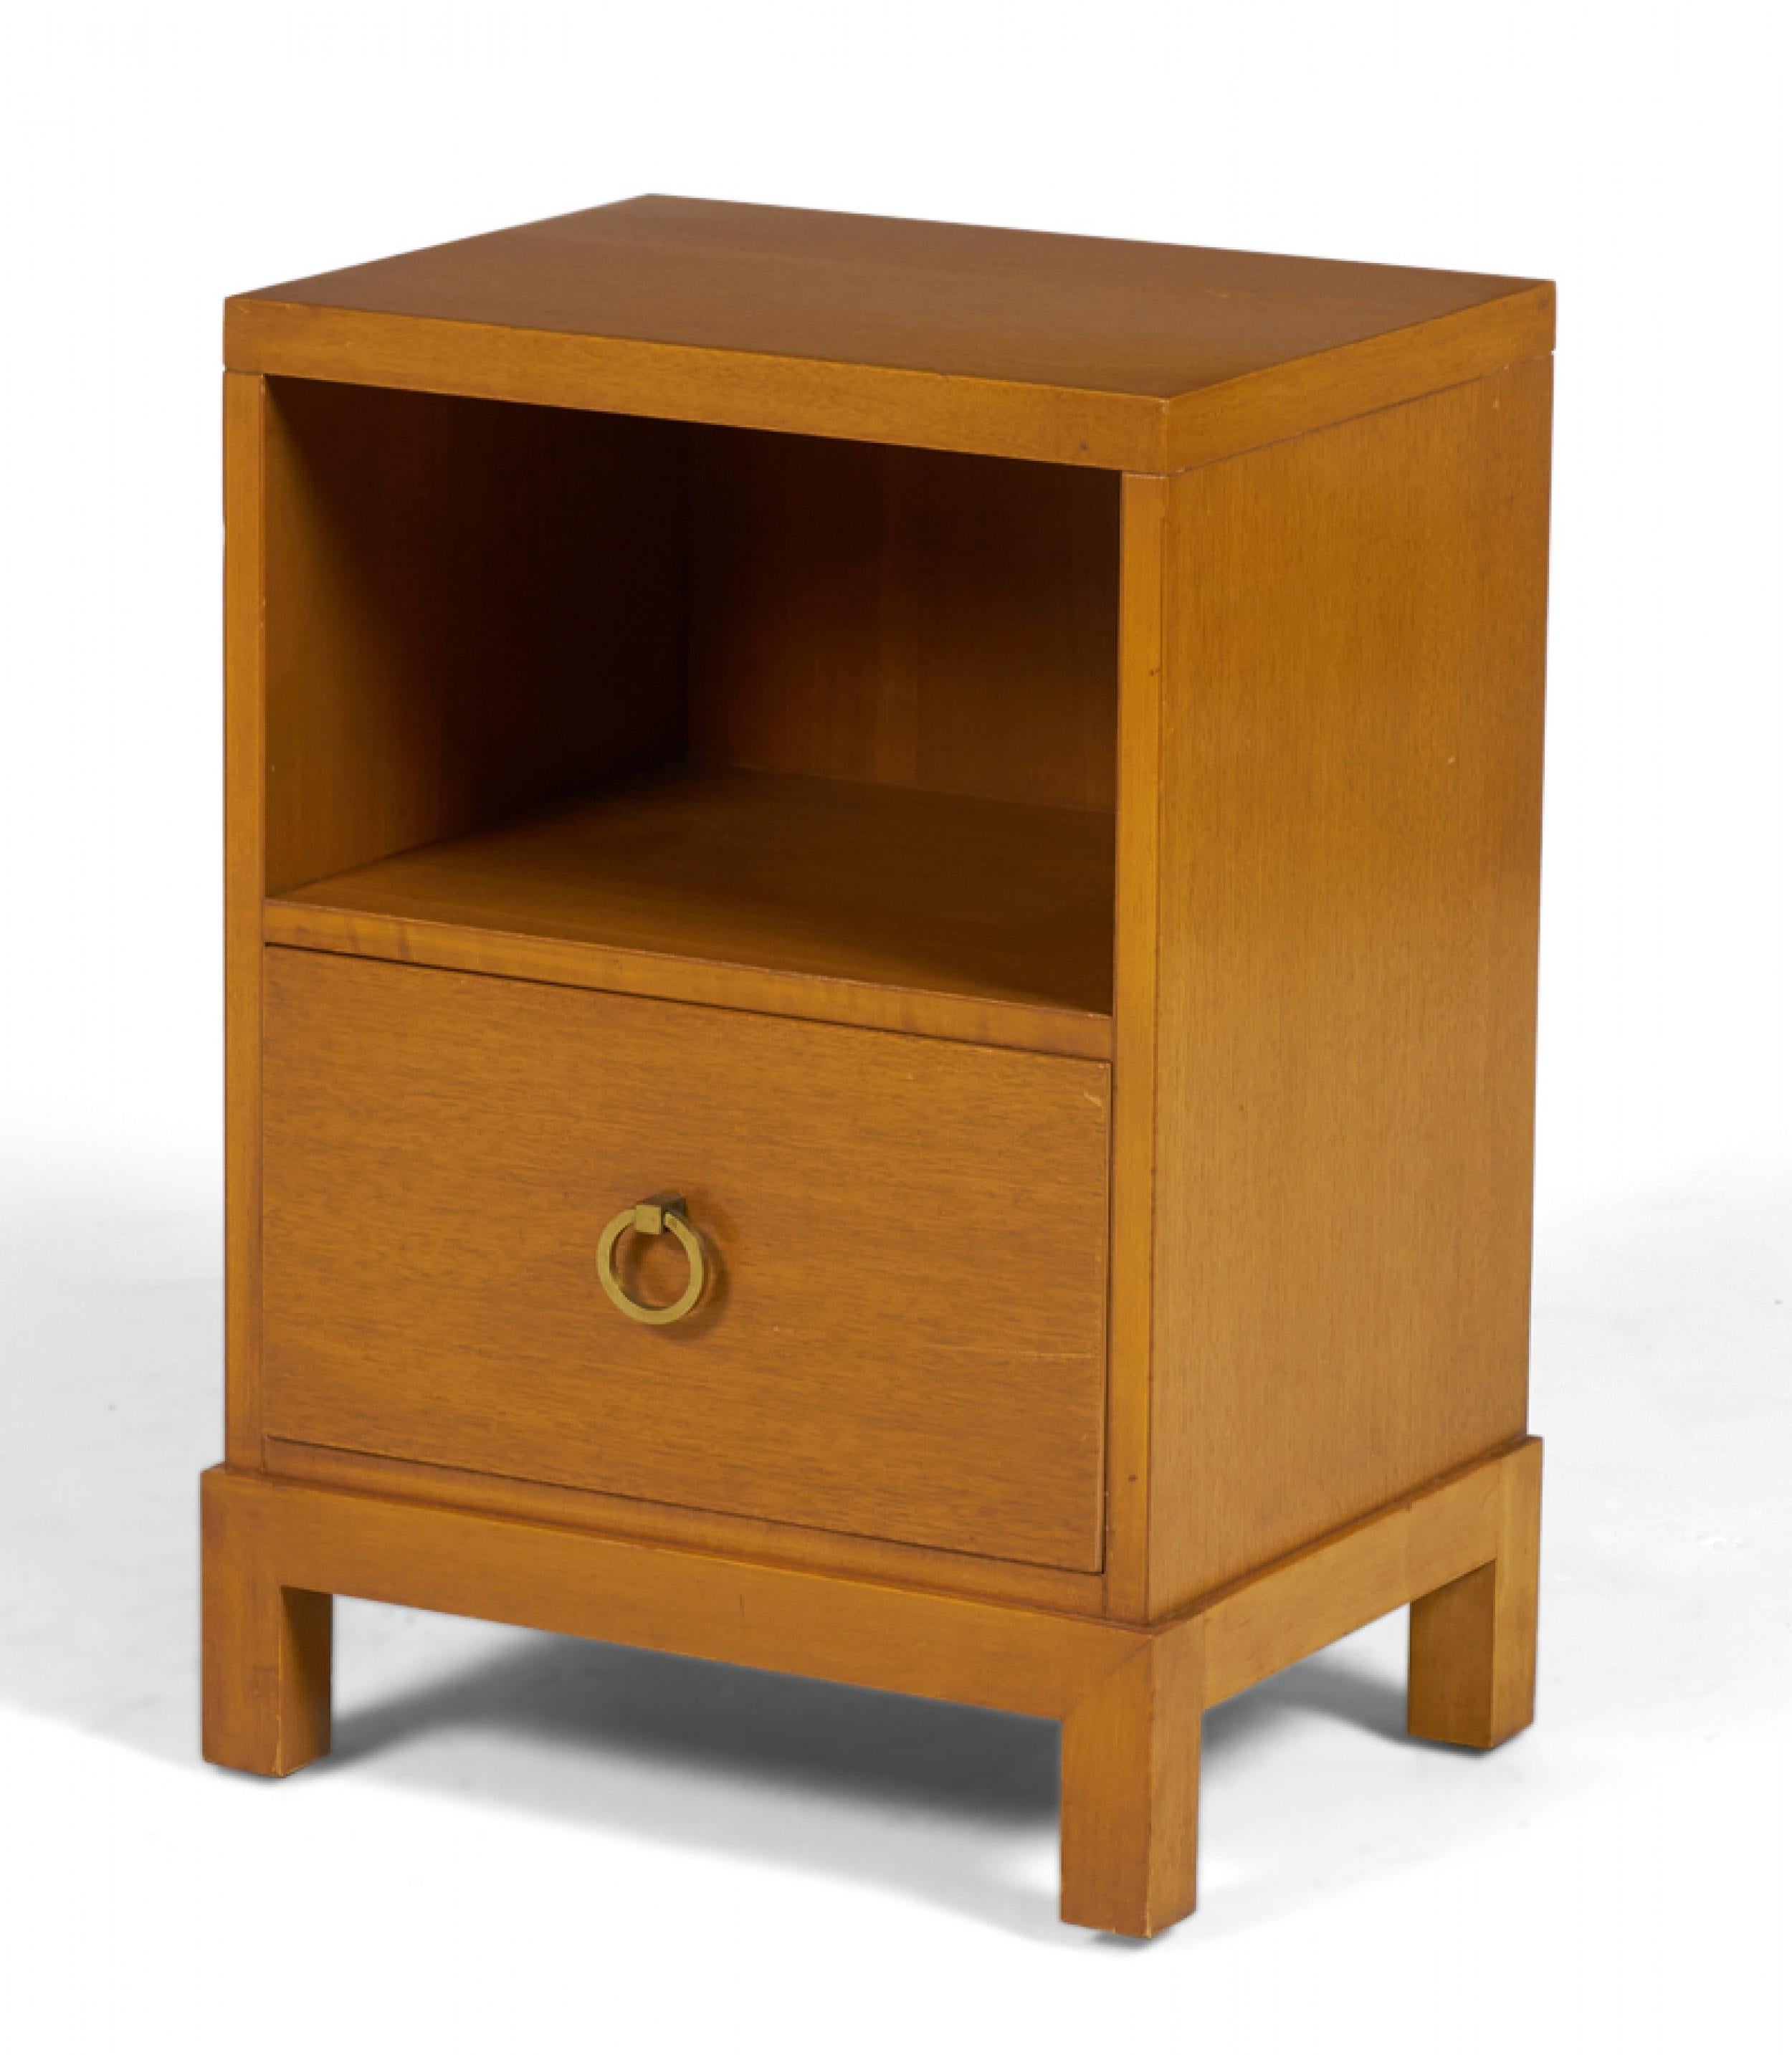 American Mid-Century (1950s) walnut nightstand with an open upper cabinet and a lower drawer with a brass ring drawer pull, resting on a square Chinese-style base. (WIDDICOMB MODERN)(Similar pieces: DUF0145A-D)
